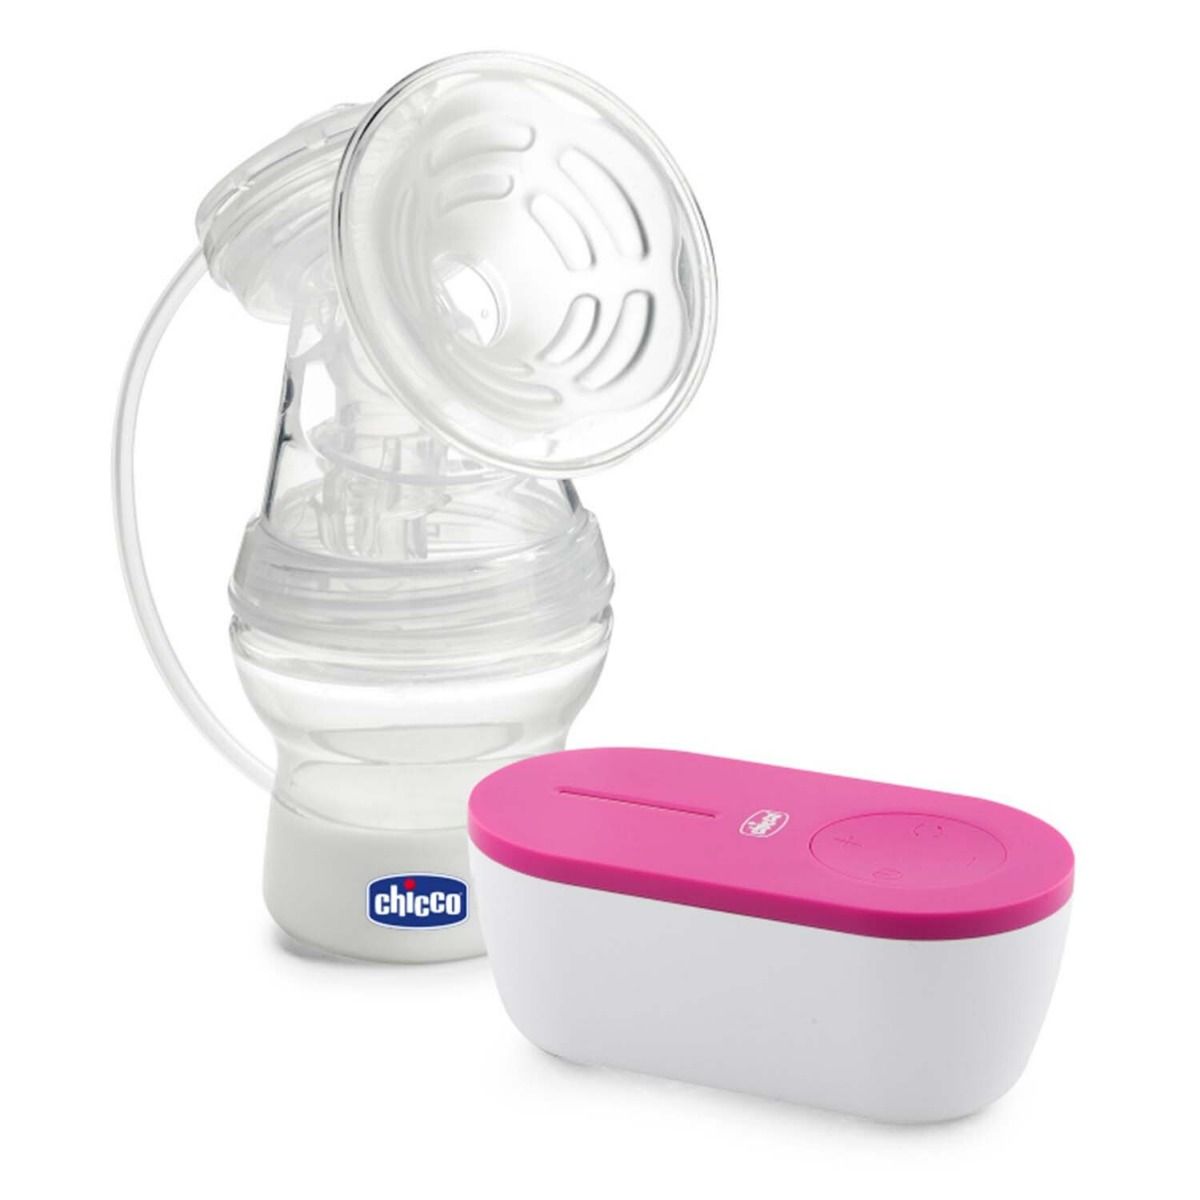 Buy Chicco Portable Electric Breast Pump, 1 Count Online